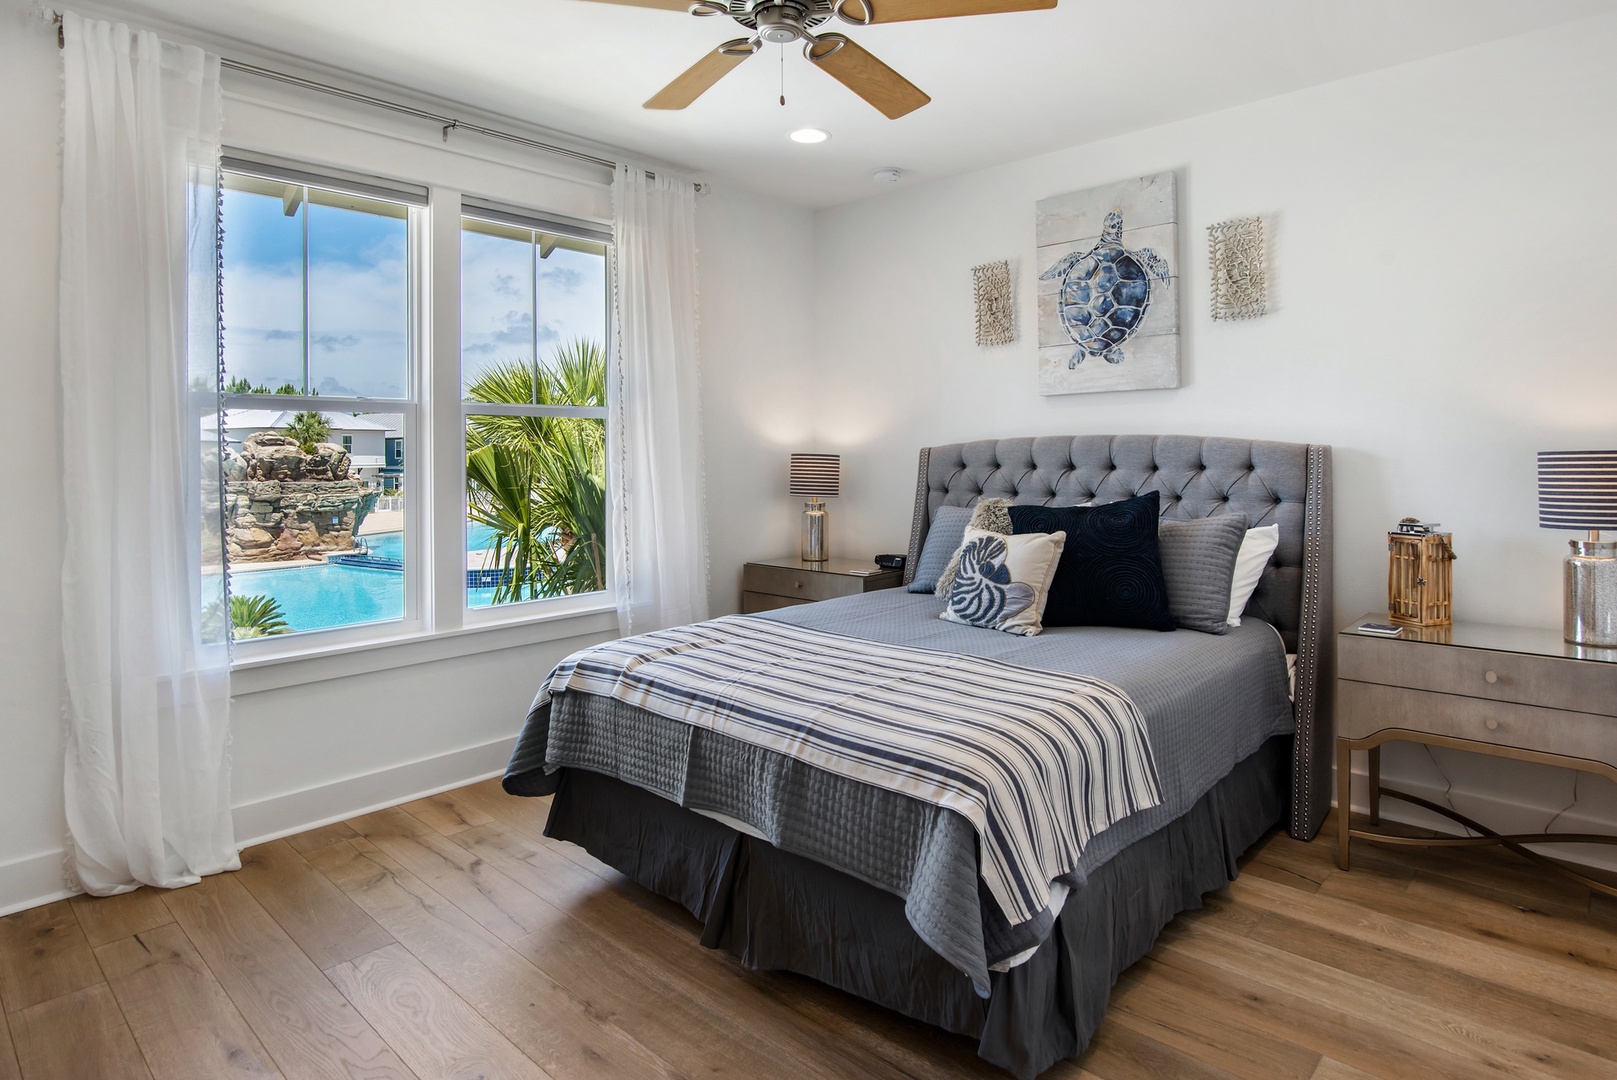 The second upstairs bedroom features a queen-bed and amazing pool views!